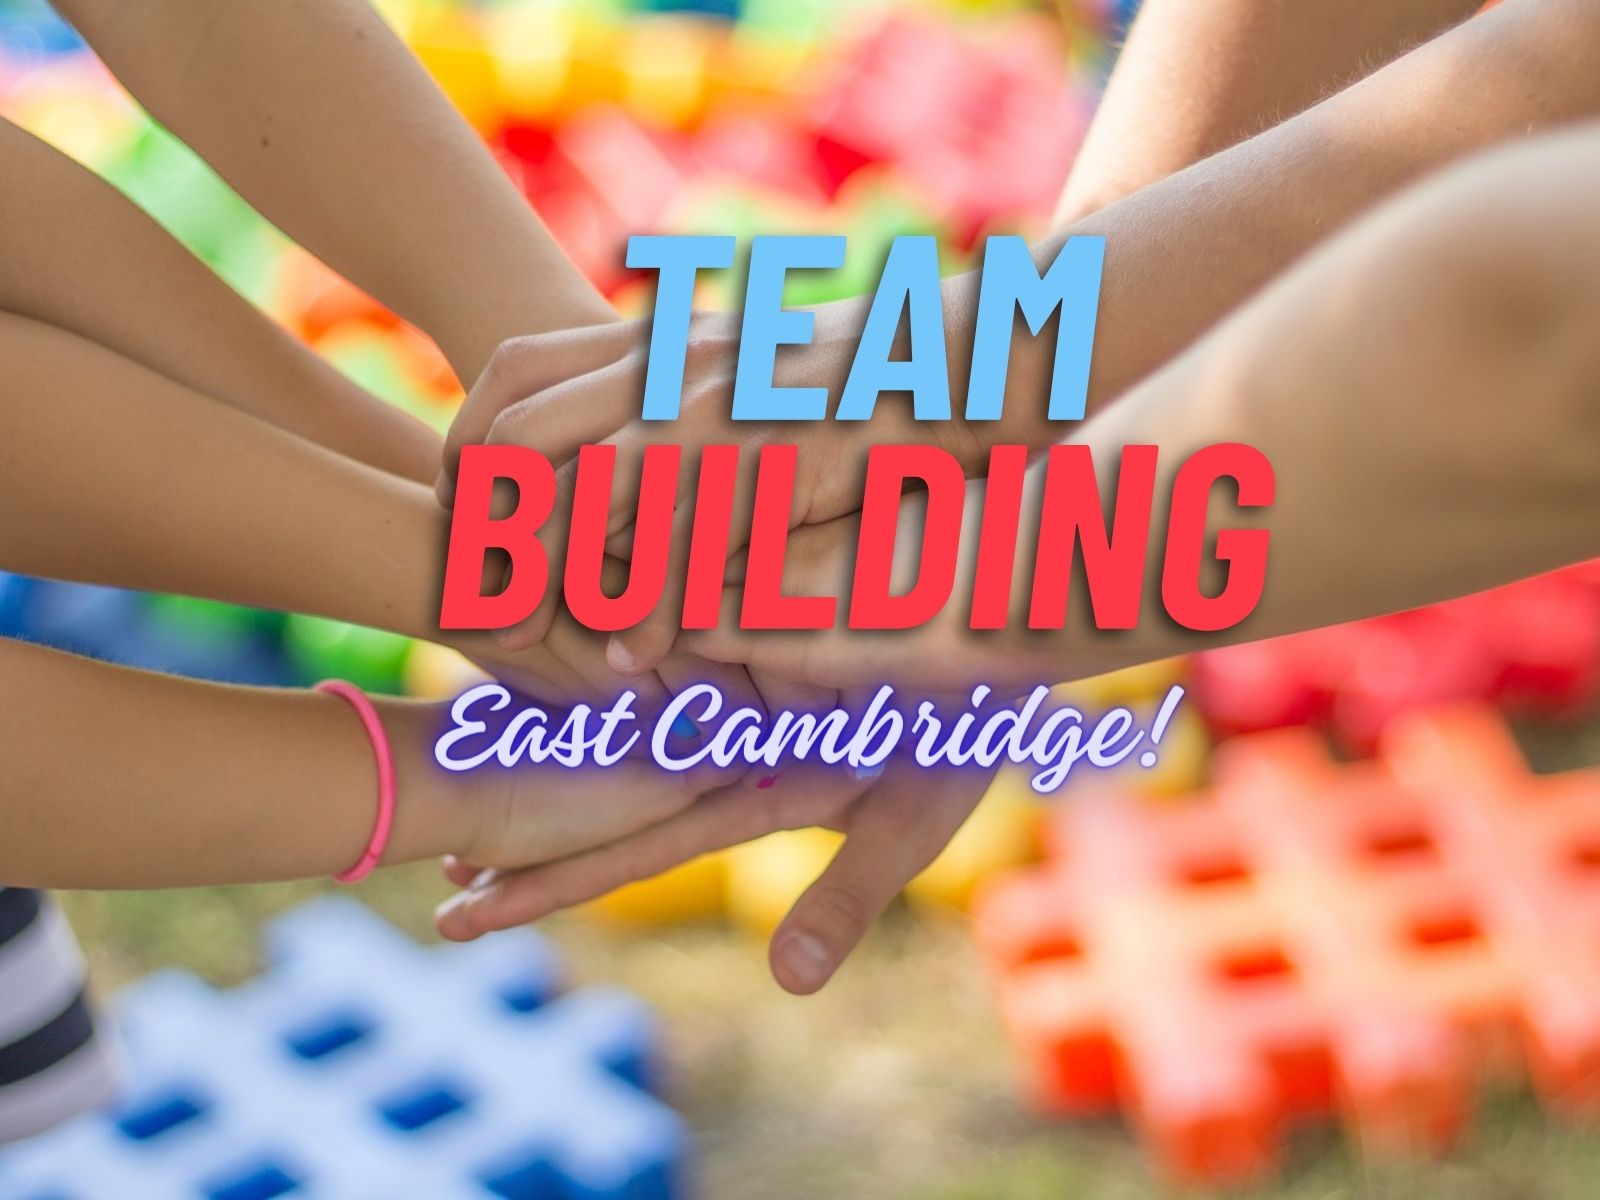 Team Building Event in East Cambridge, Massachusetts: Creating Stronger Bonds at Musicians Playground